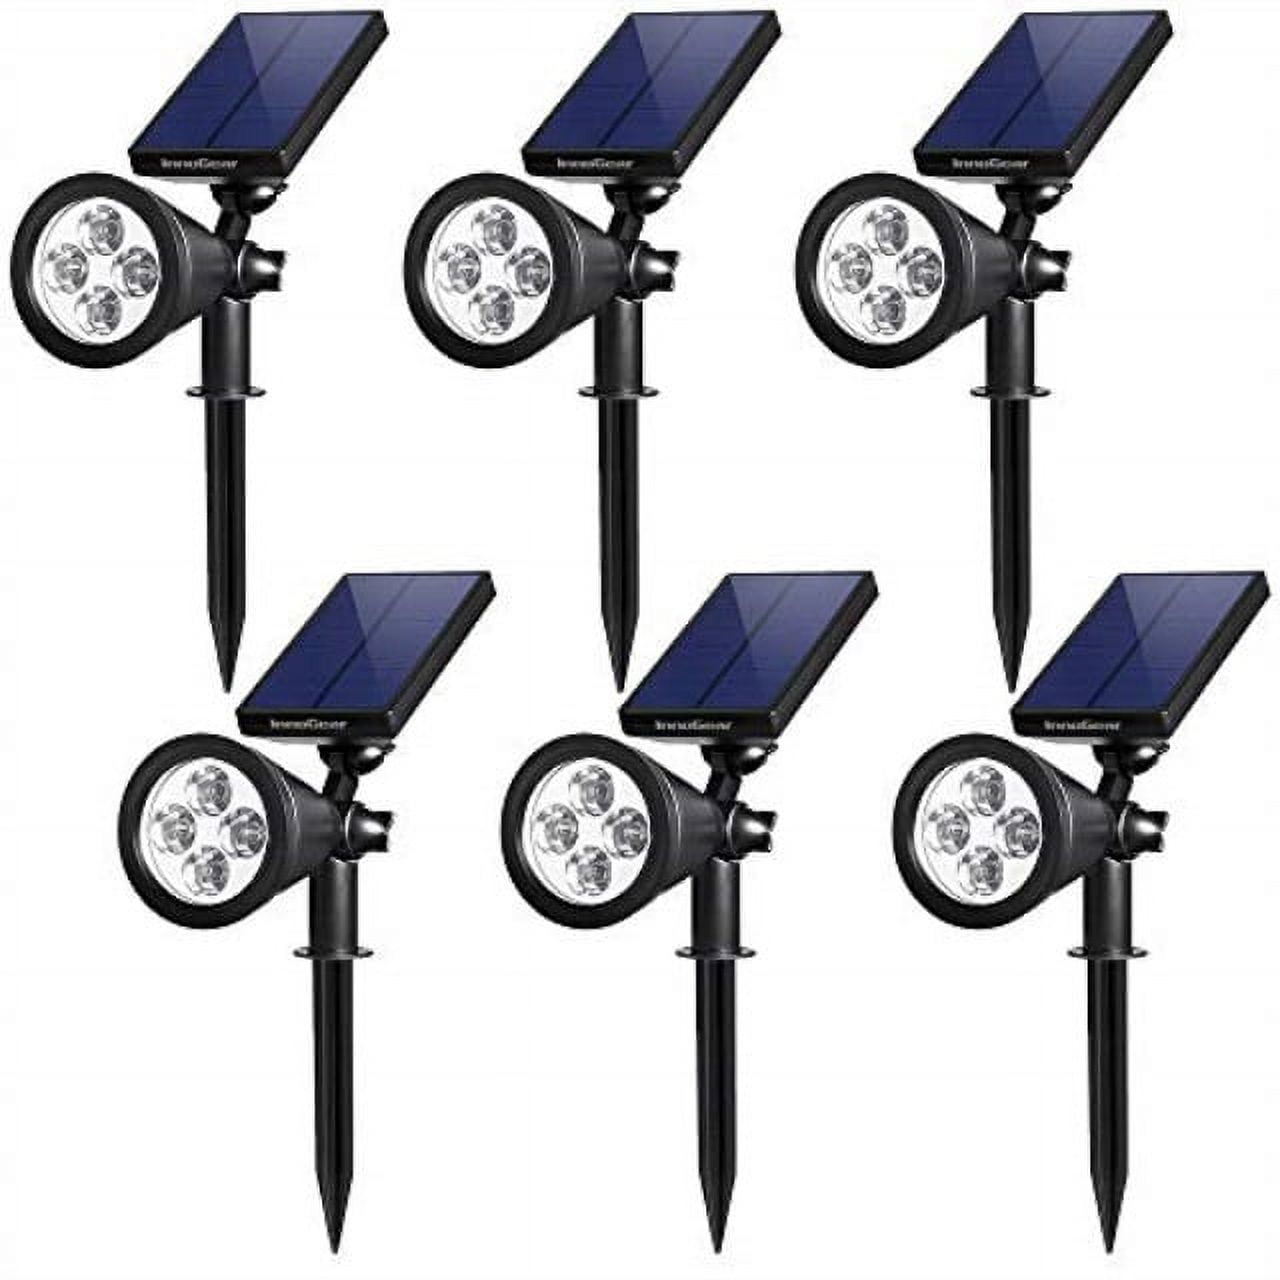 innogear upgraded solar lights 2-in-1 waterproof outdoor landscape lighting  spotlight wall light auto on/off for yard garden driveway pathway pool,  pack of (white light)